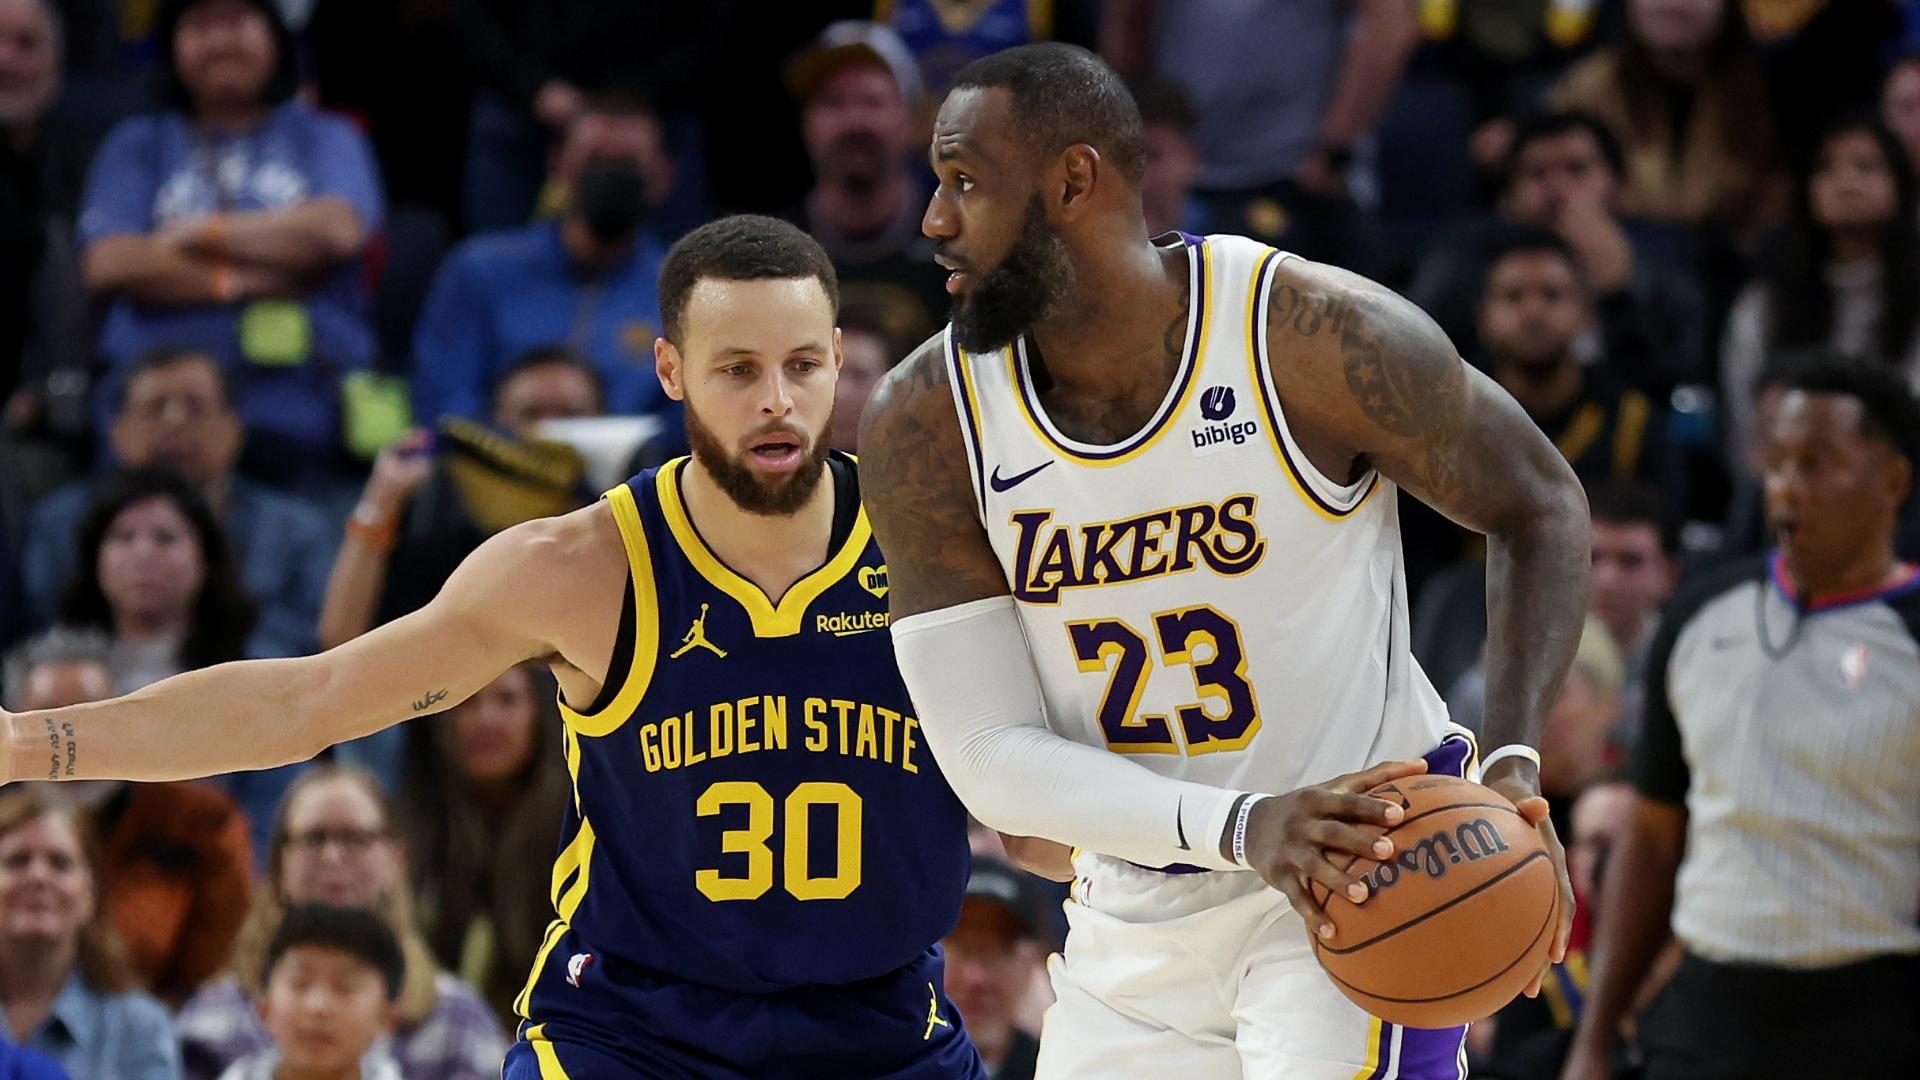 Implications of Golden State's Pursuit of LeBron for the Futures of the Warriors and Lakers